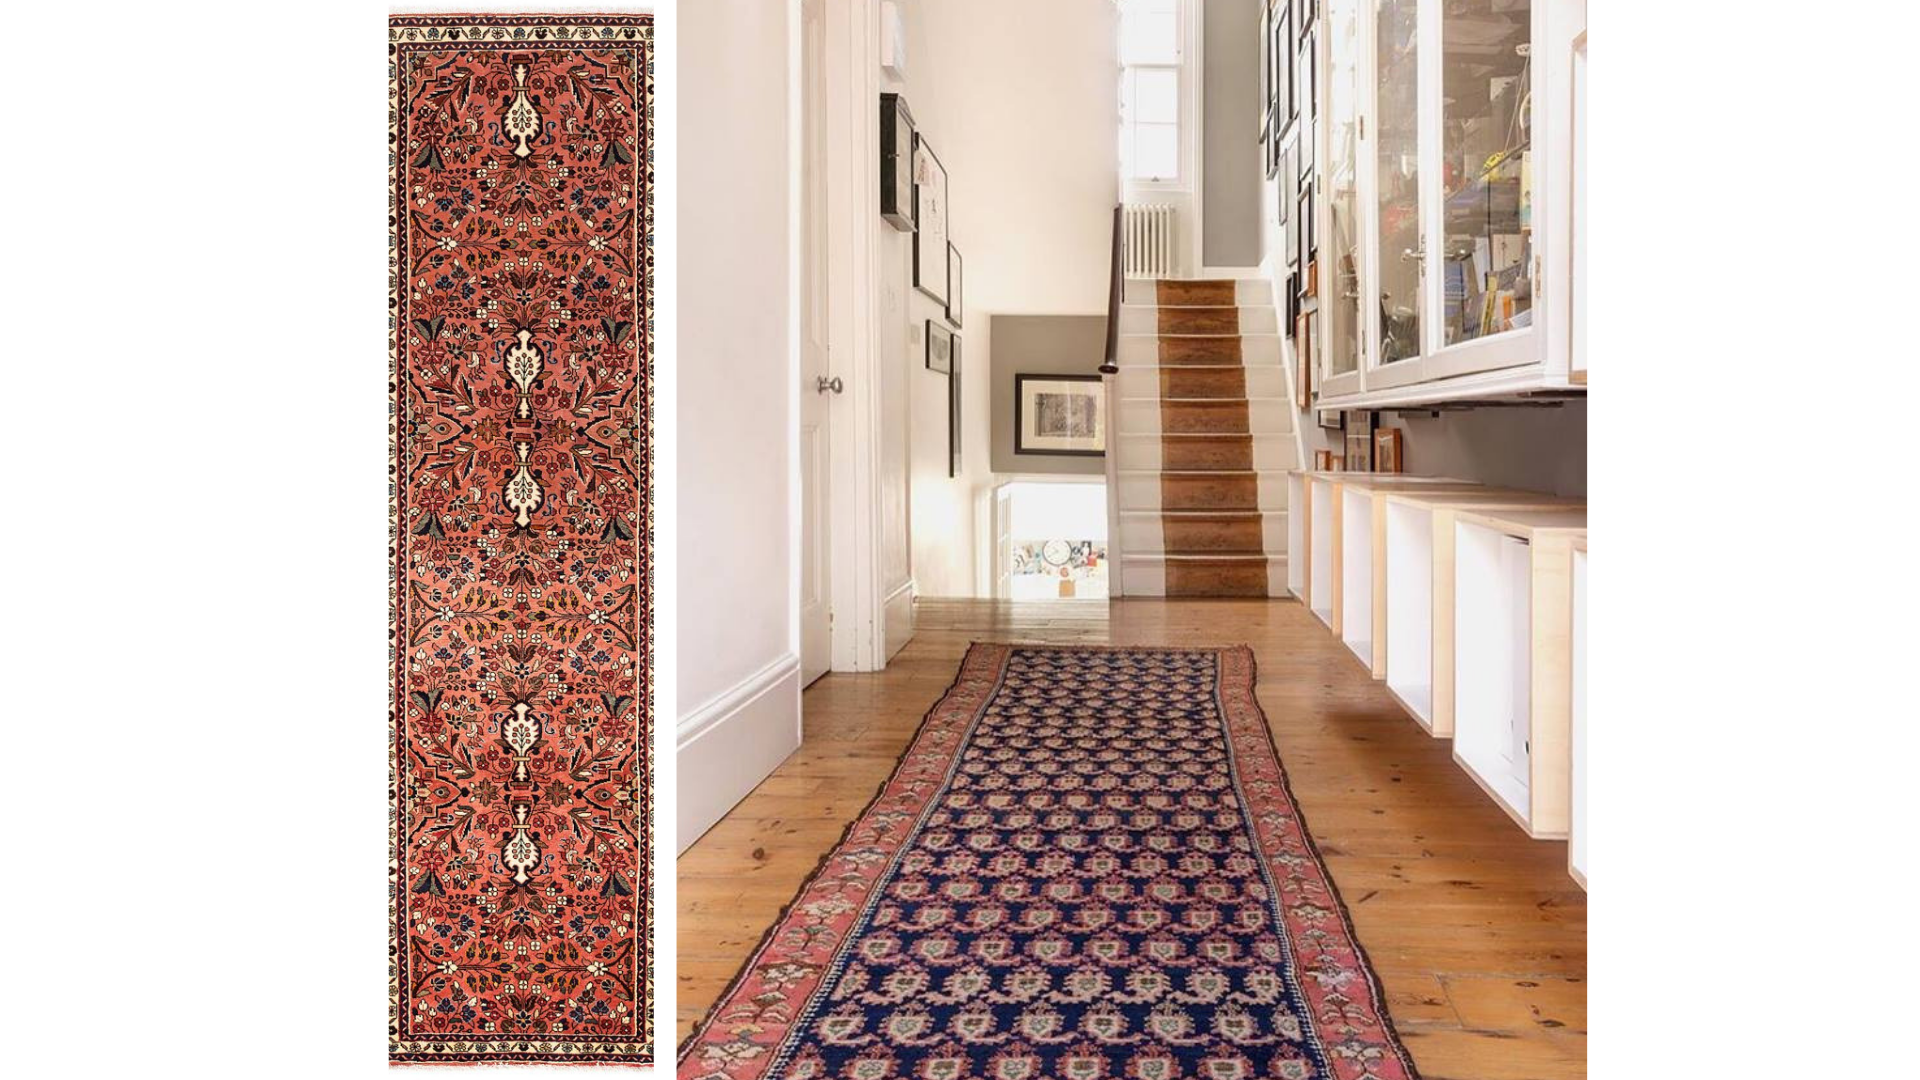 Rug Placement, interior design, design ideas, interior layout, rug collections, london rugs, persian rugs